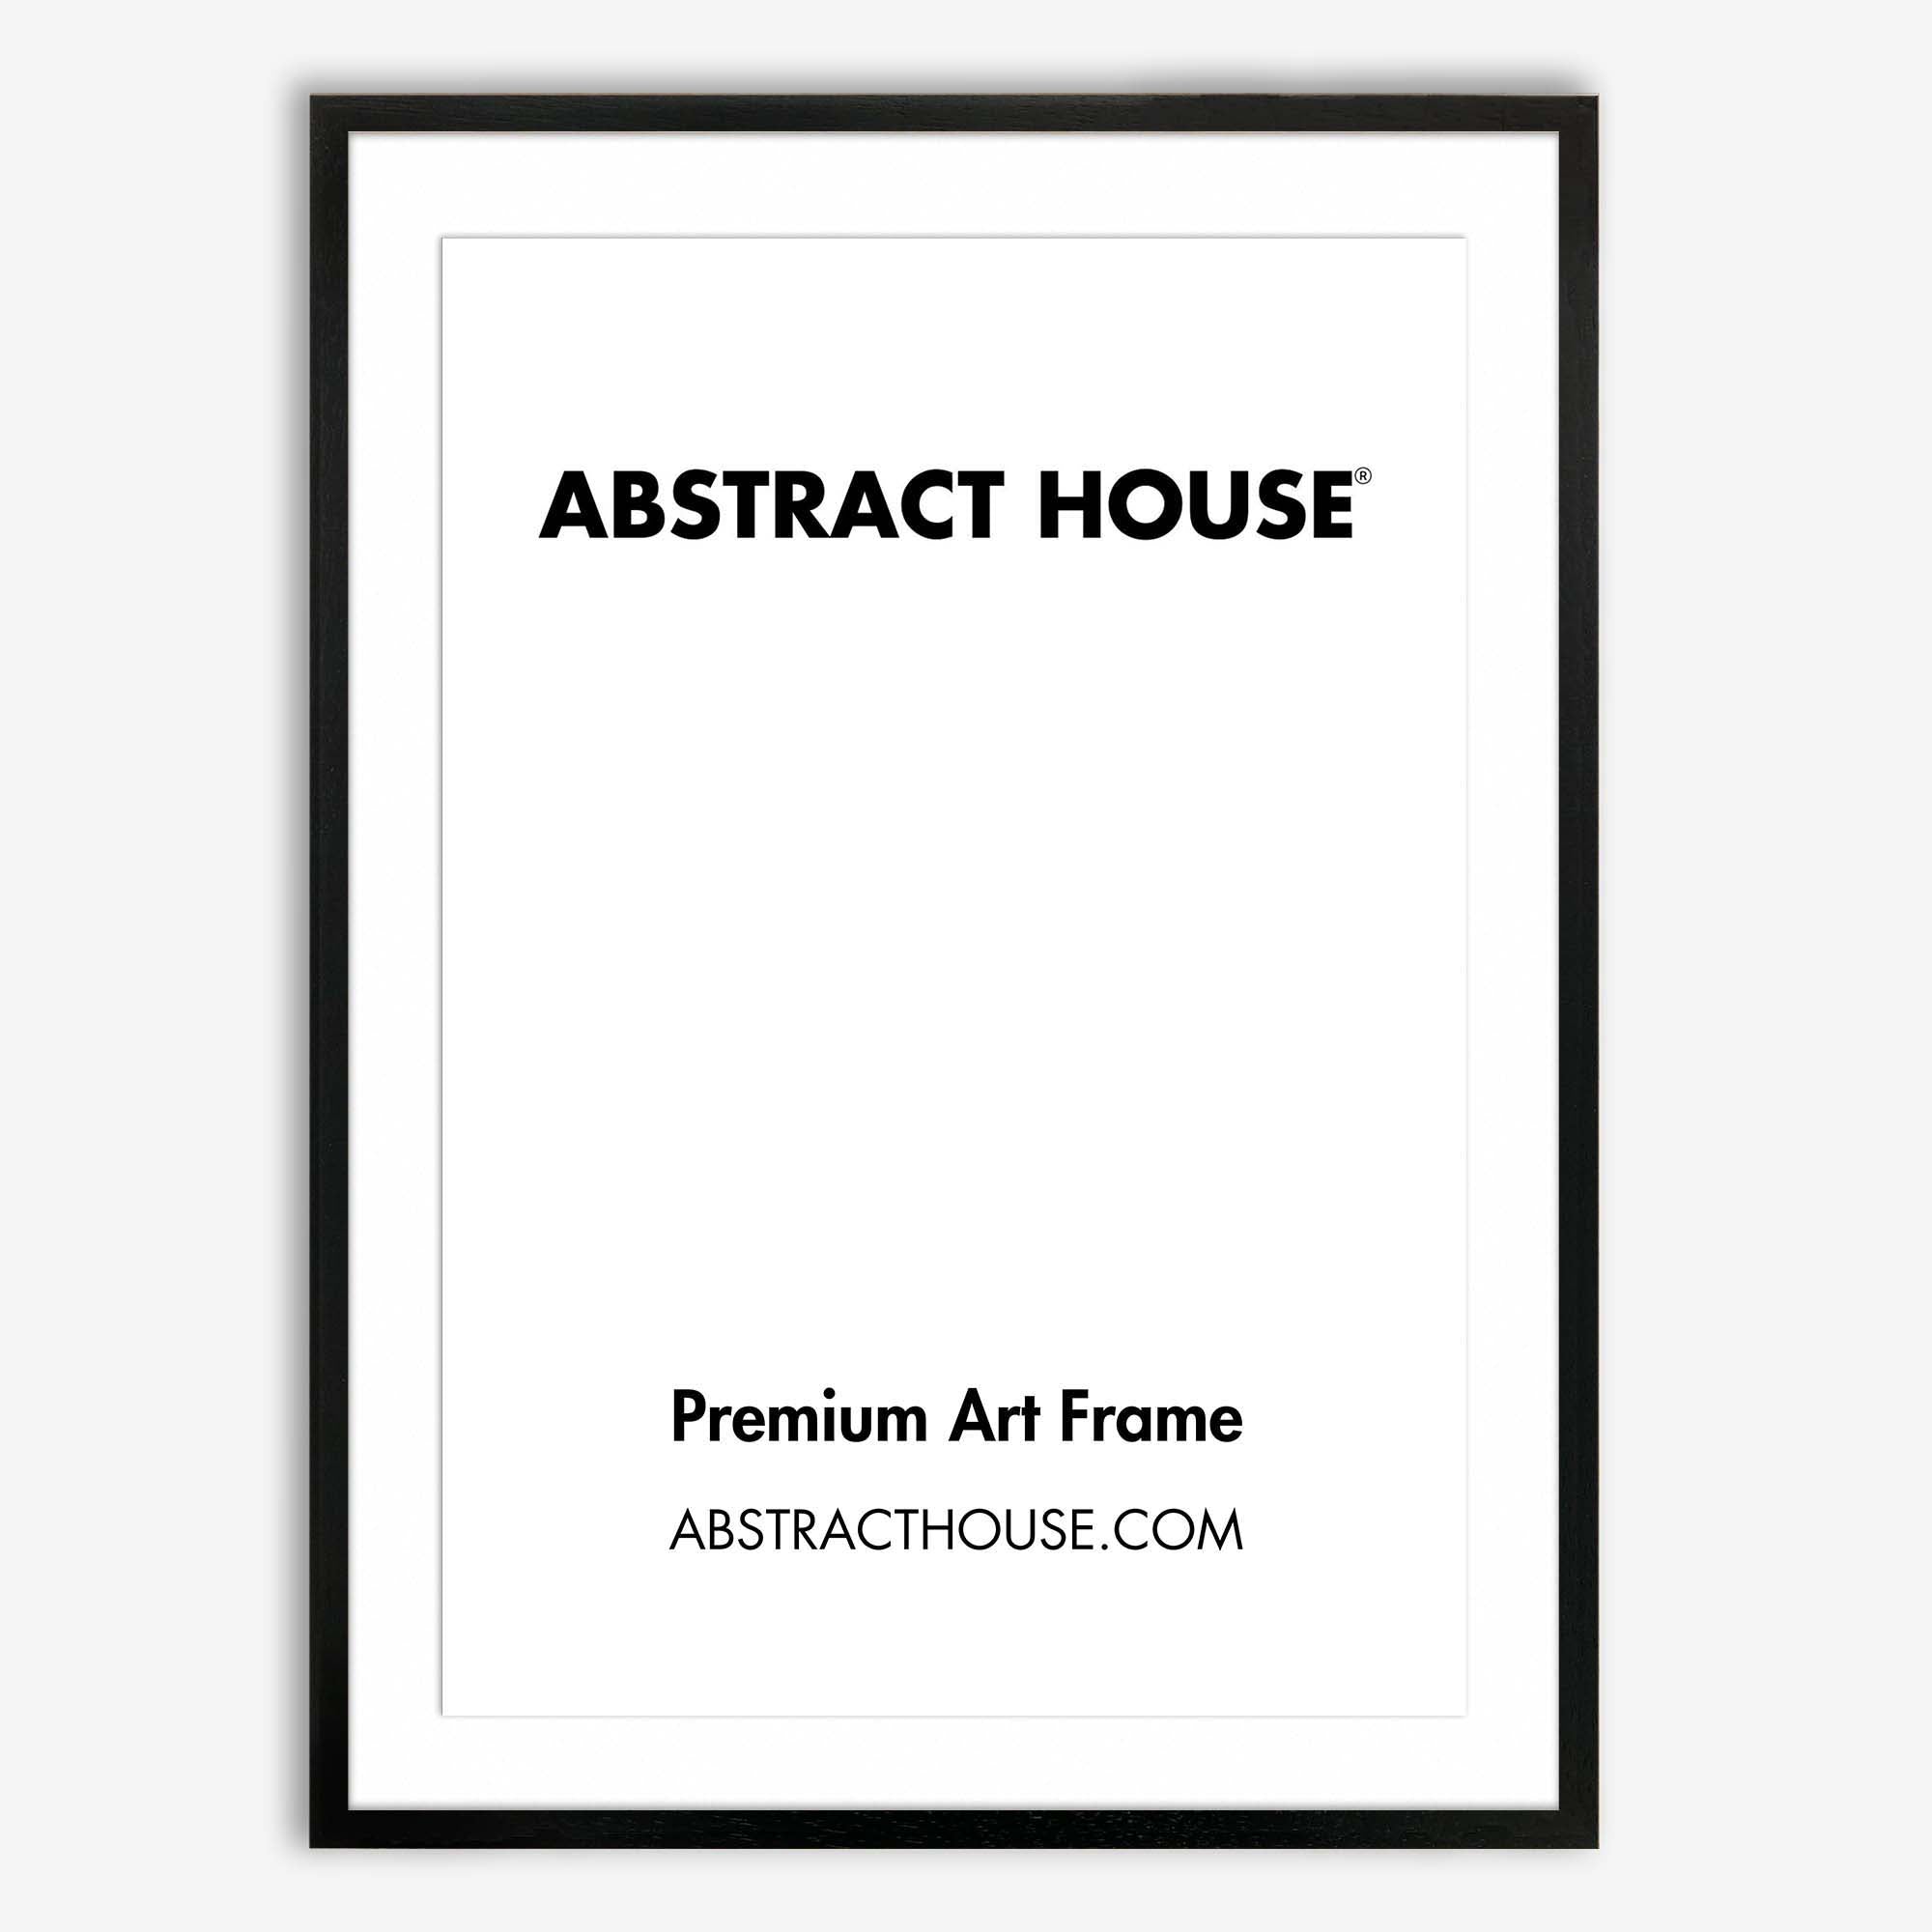 100 x 70 cm Wooden Picture Frame-Black-60 x 90 cm-Abstract House